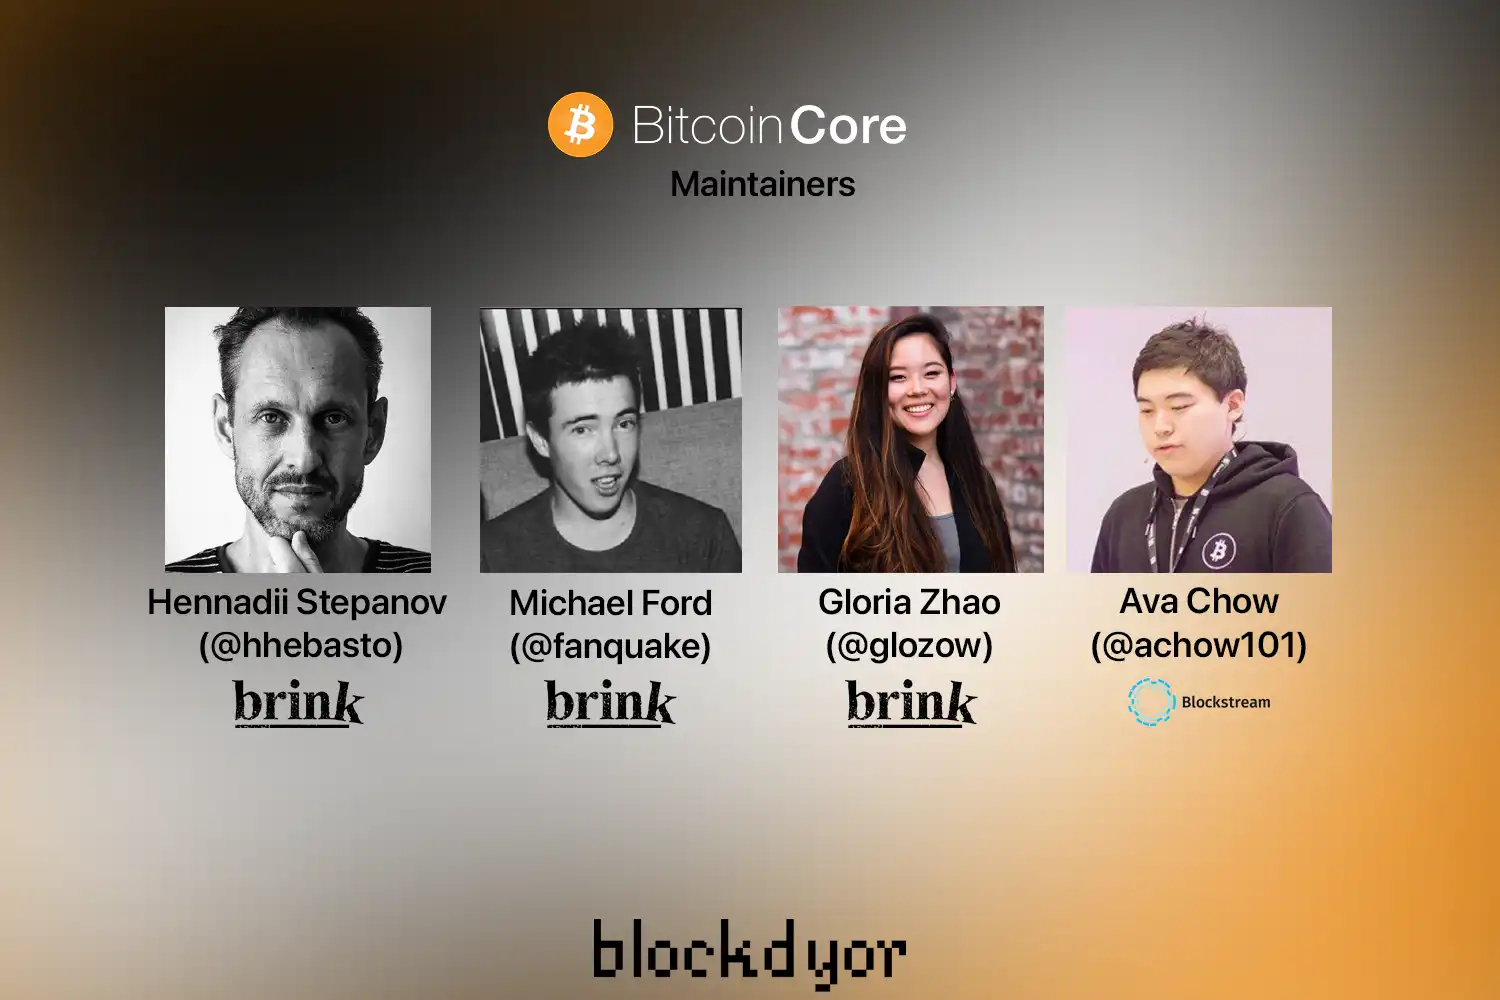 Bitcoin Core Maintainers